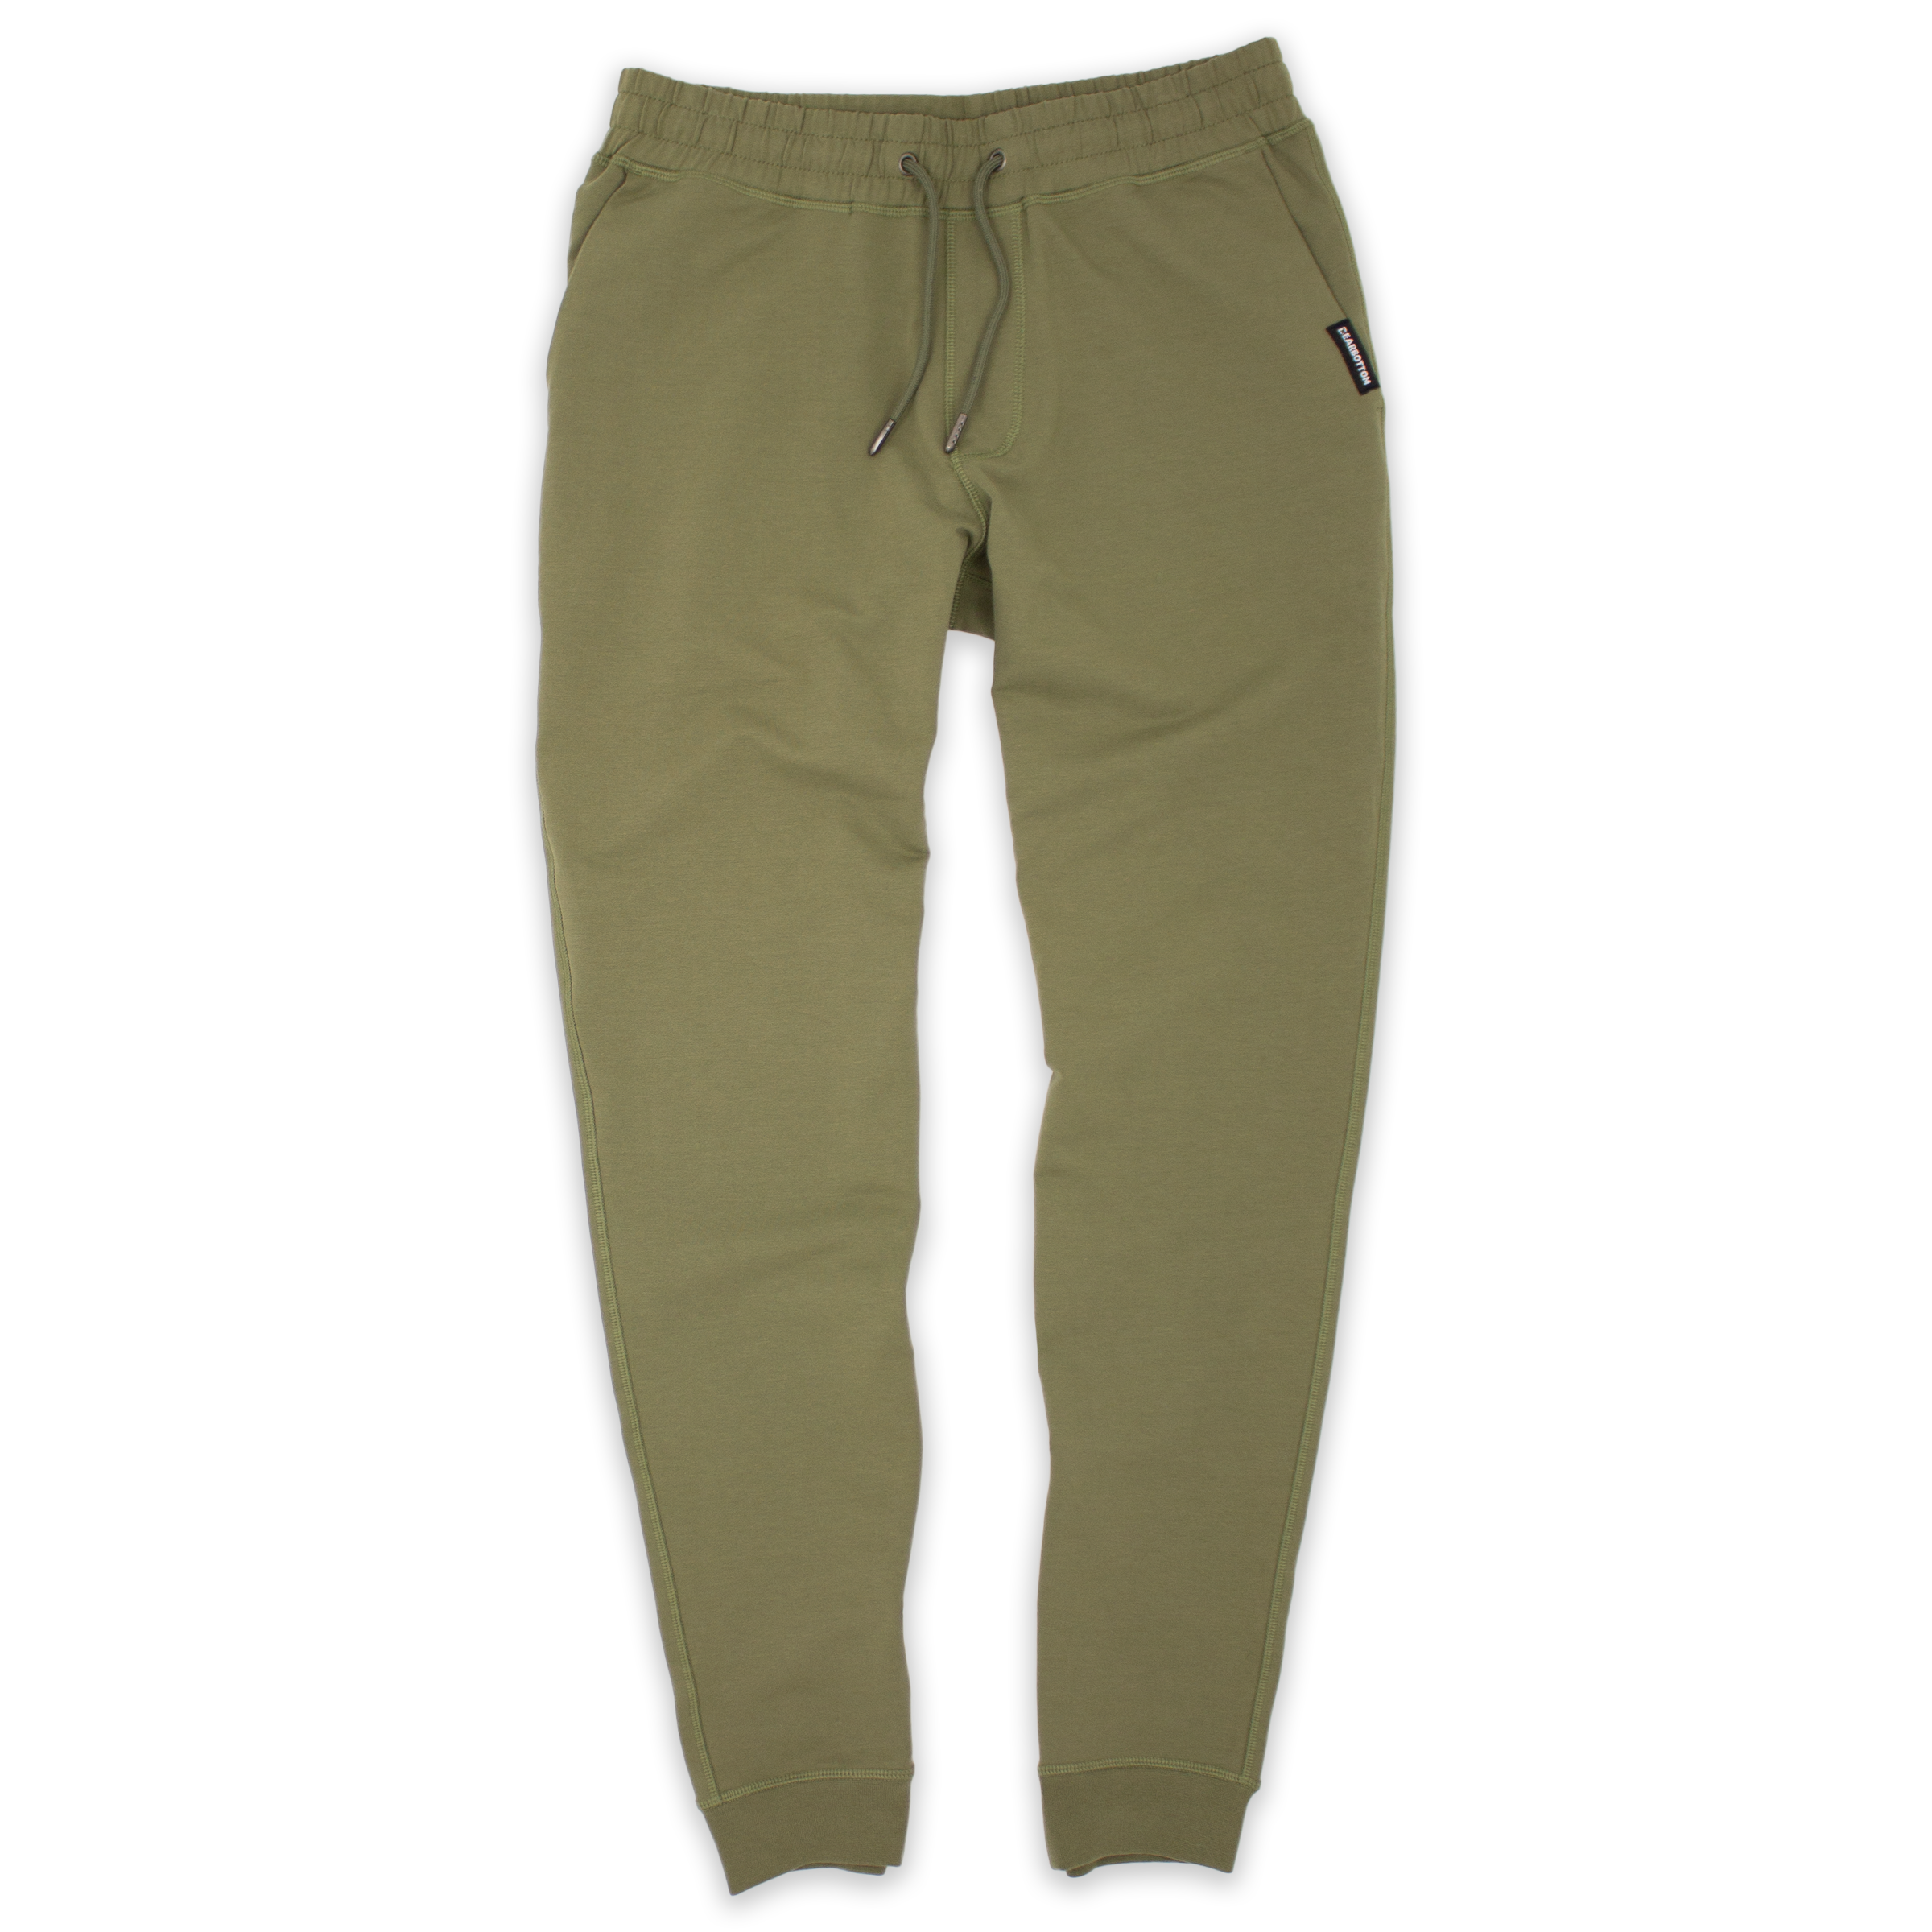 Loft Jogger Olive with elastic waistband, drawstring with metal tips, two inseam pockets, and ribbed ankle cuffs